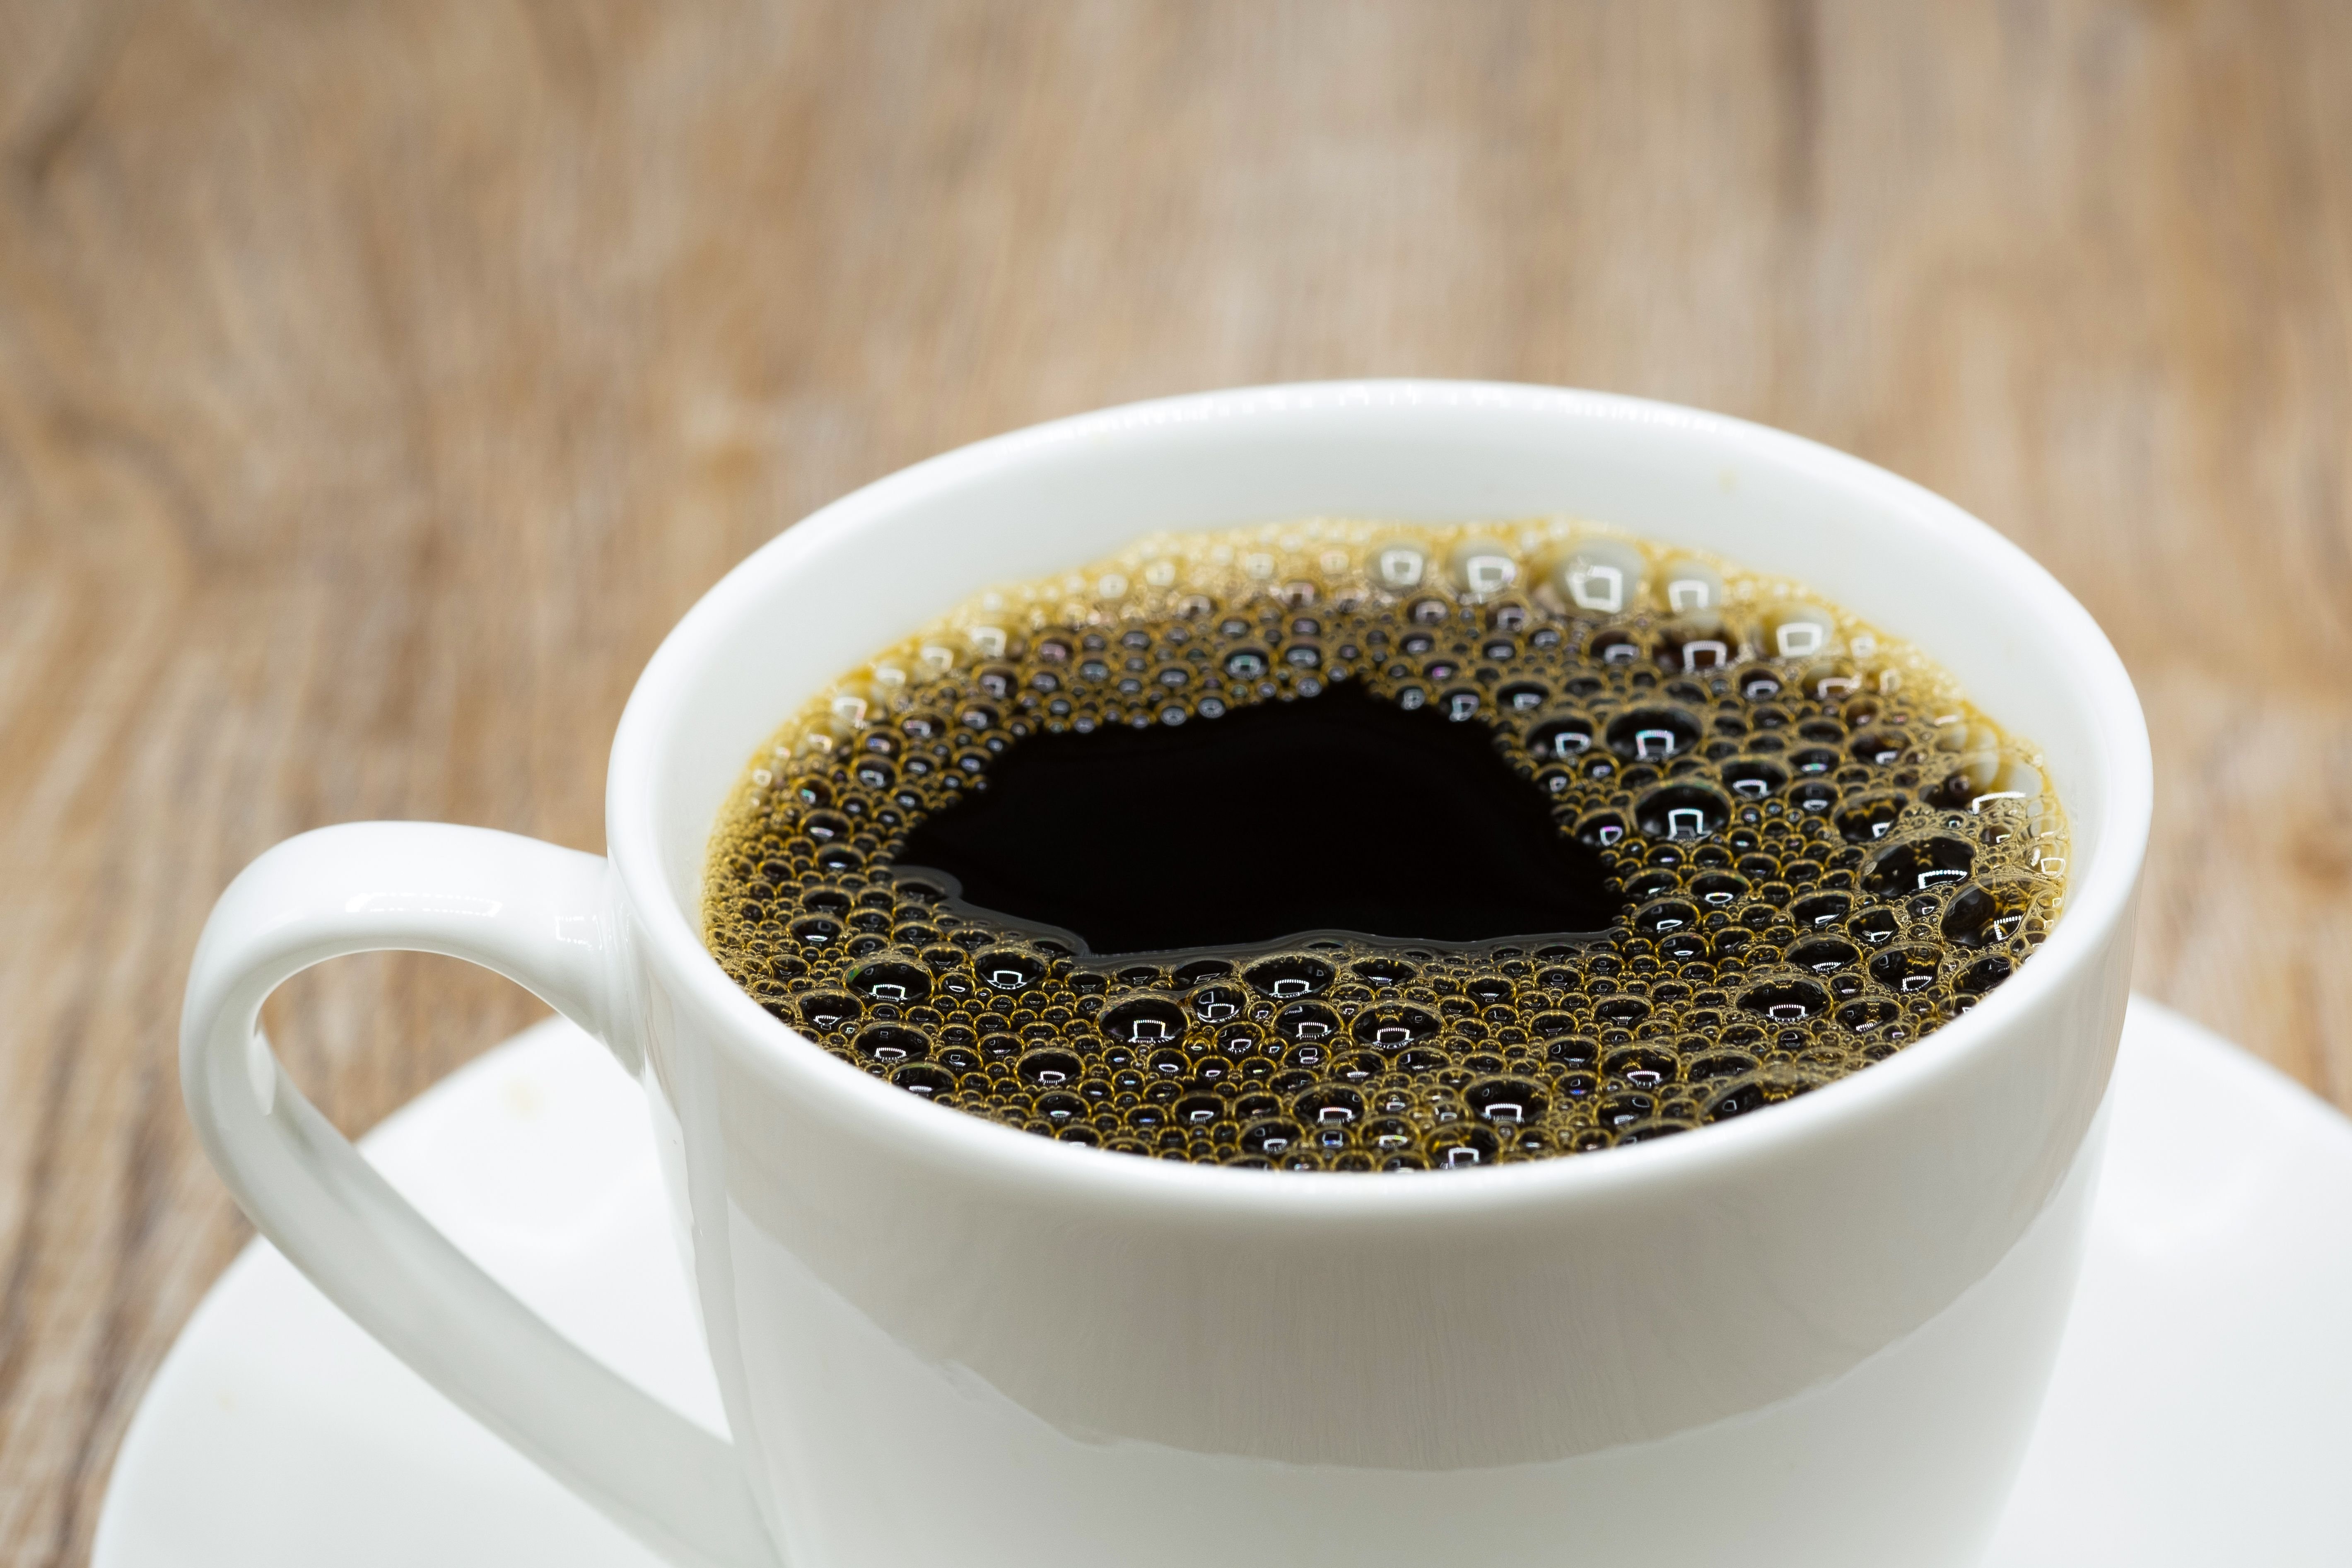 A hot cup of black coffee. | Source: Shutterstock